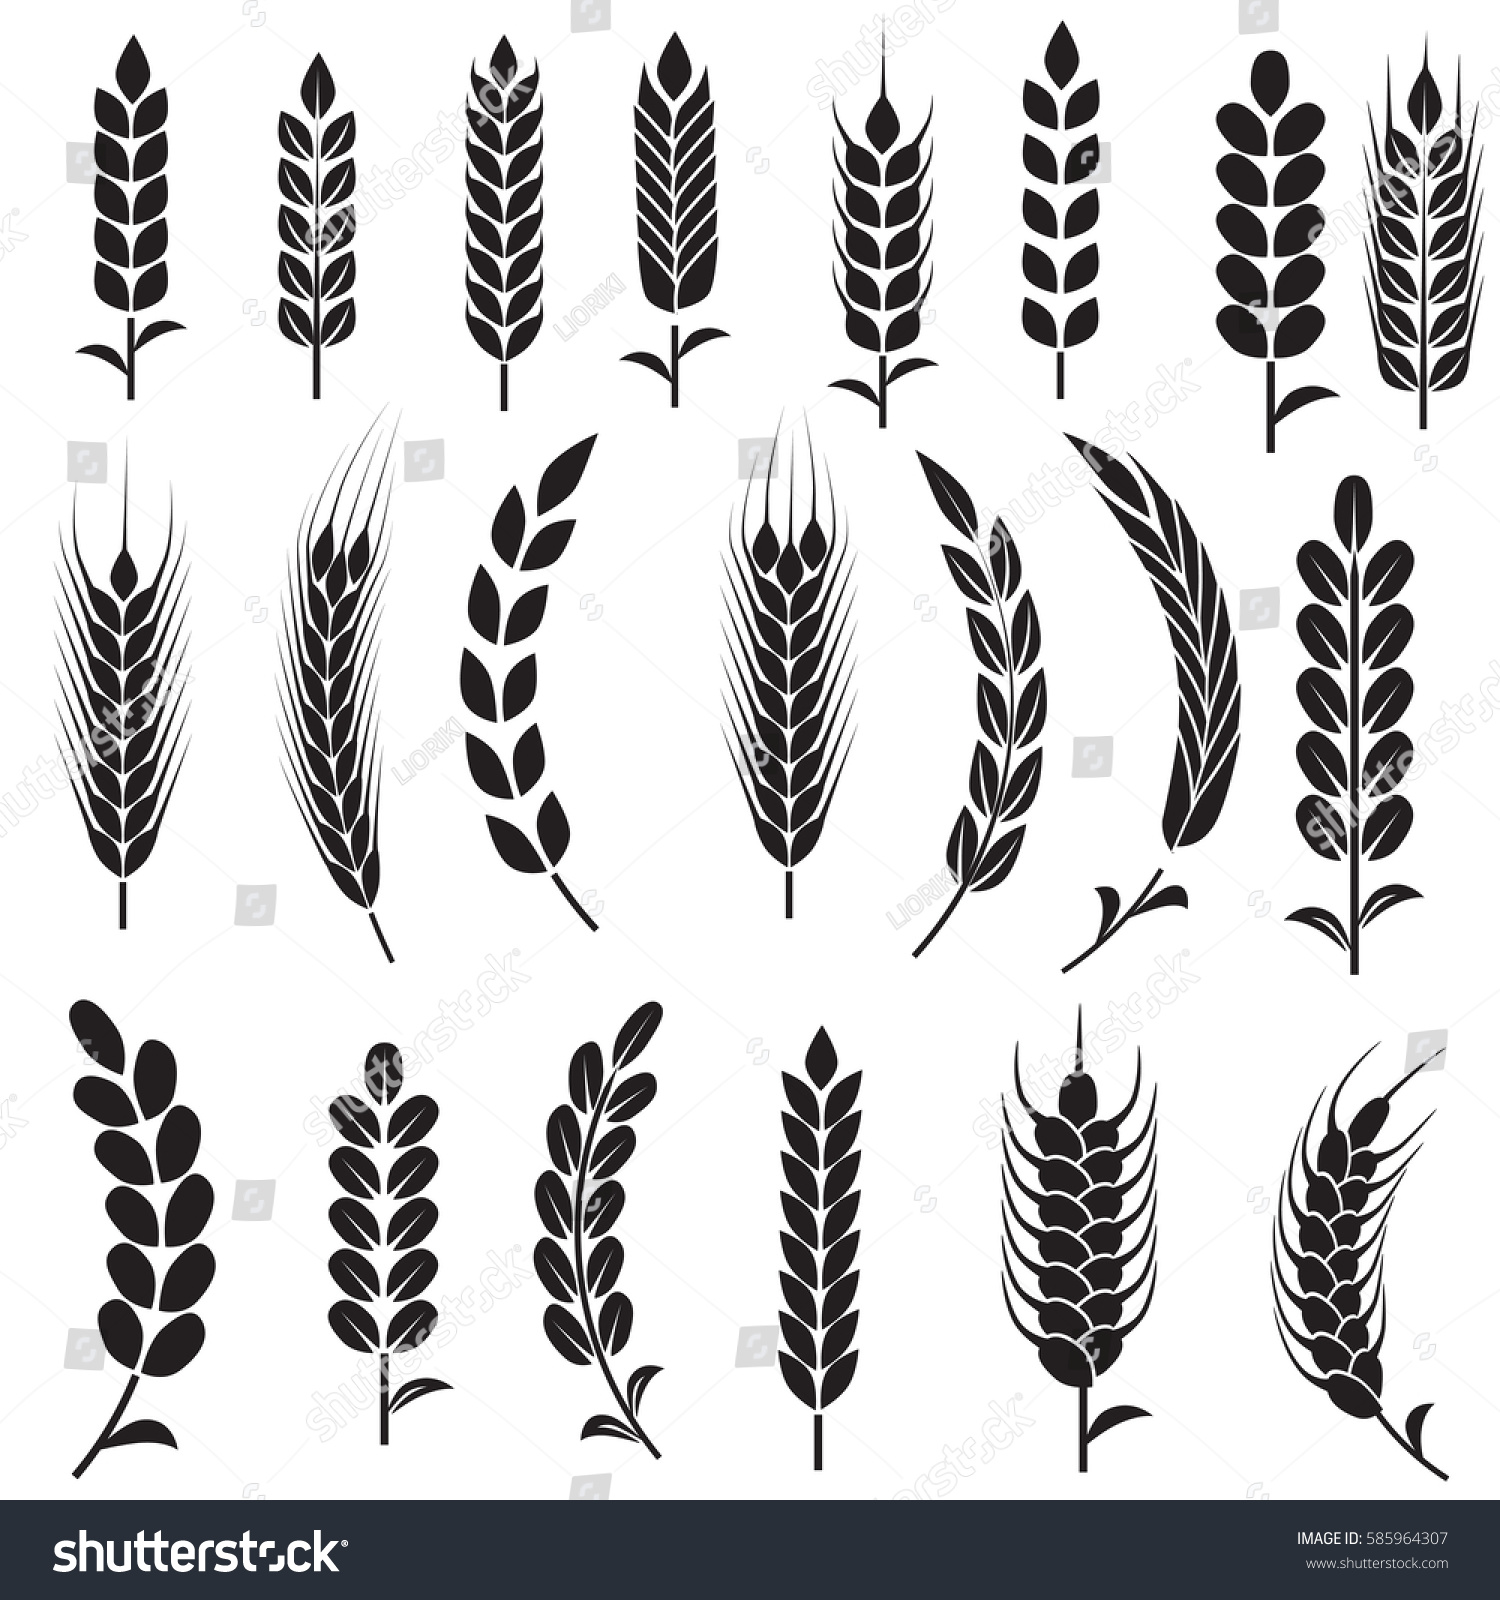 Wheat Ears Icons and Logo Set. For Identity Style of Natural Product Company and Farm Company. Organic wheat, bread agriculture and natural eat. Contour lines. Flat design. #585964307